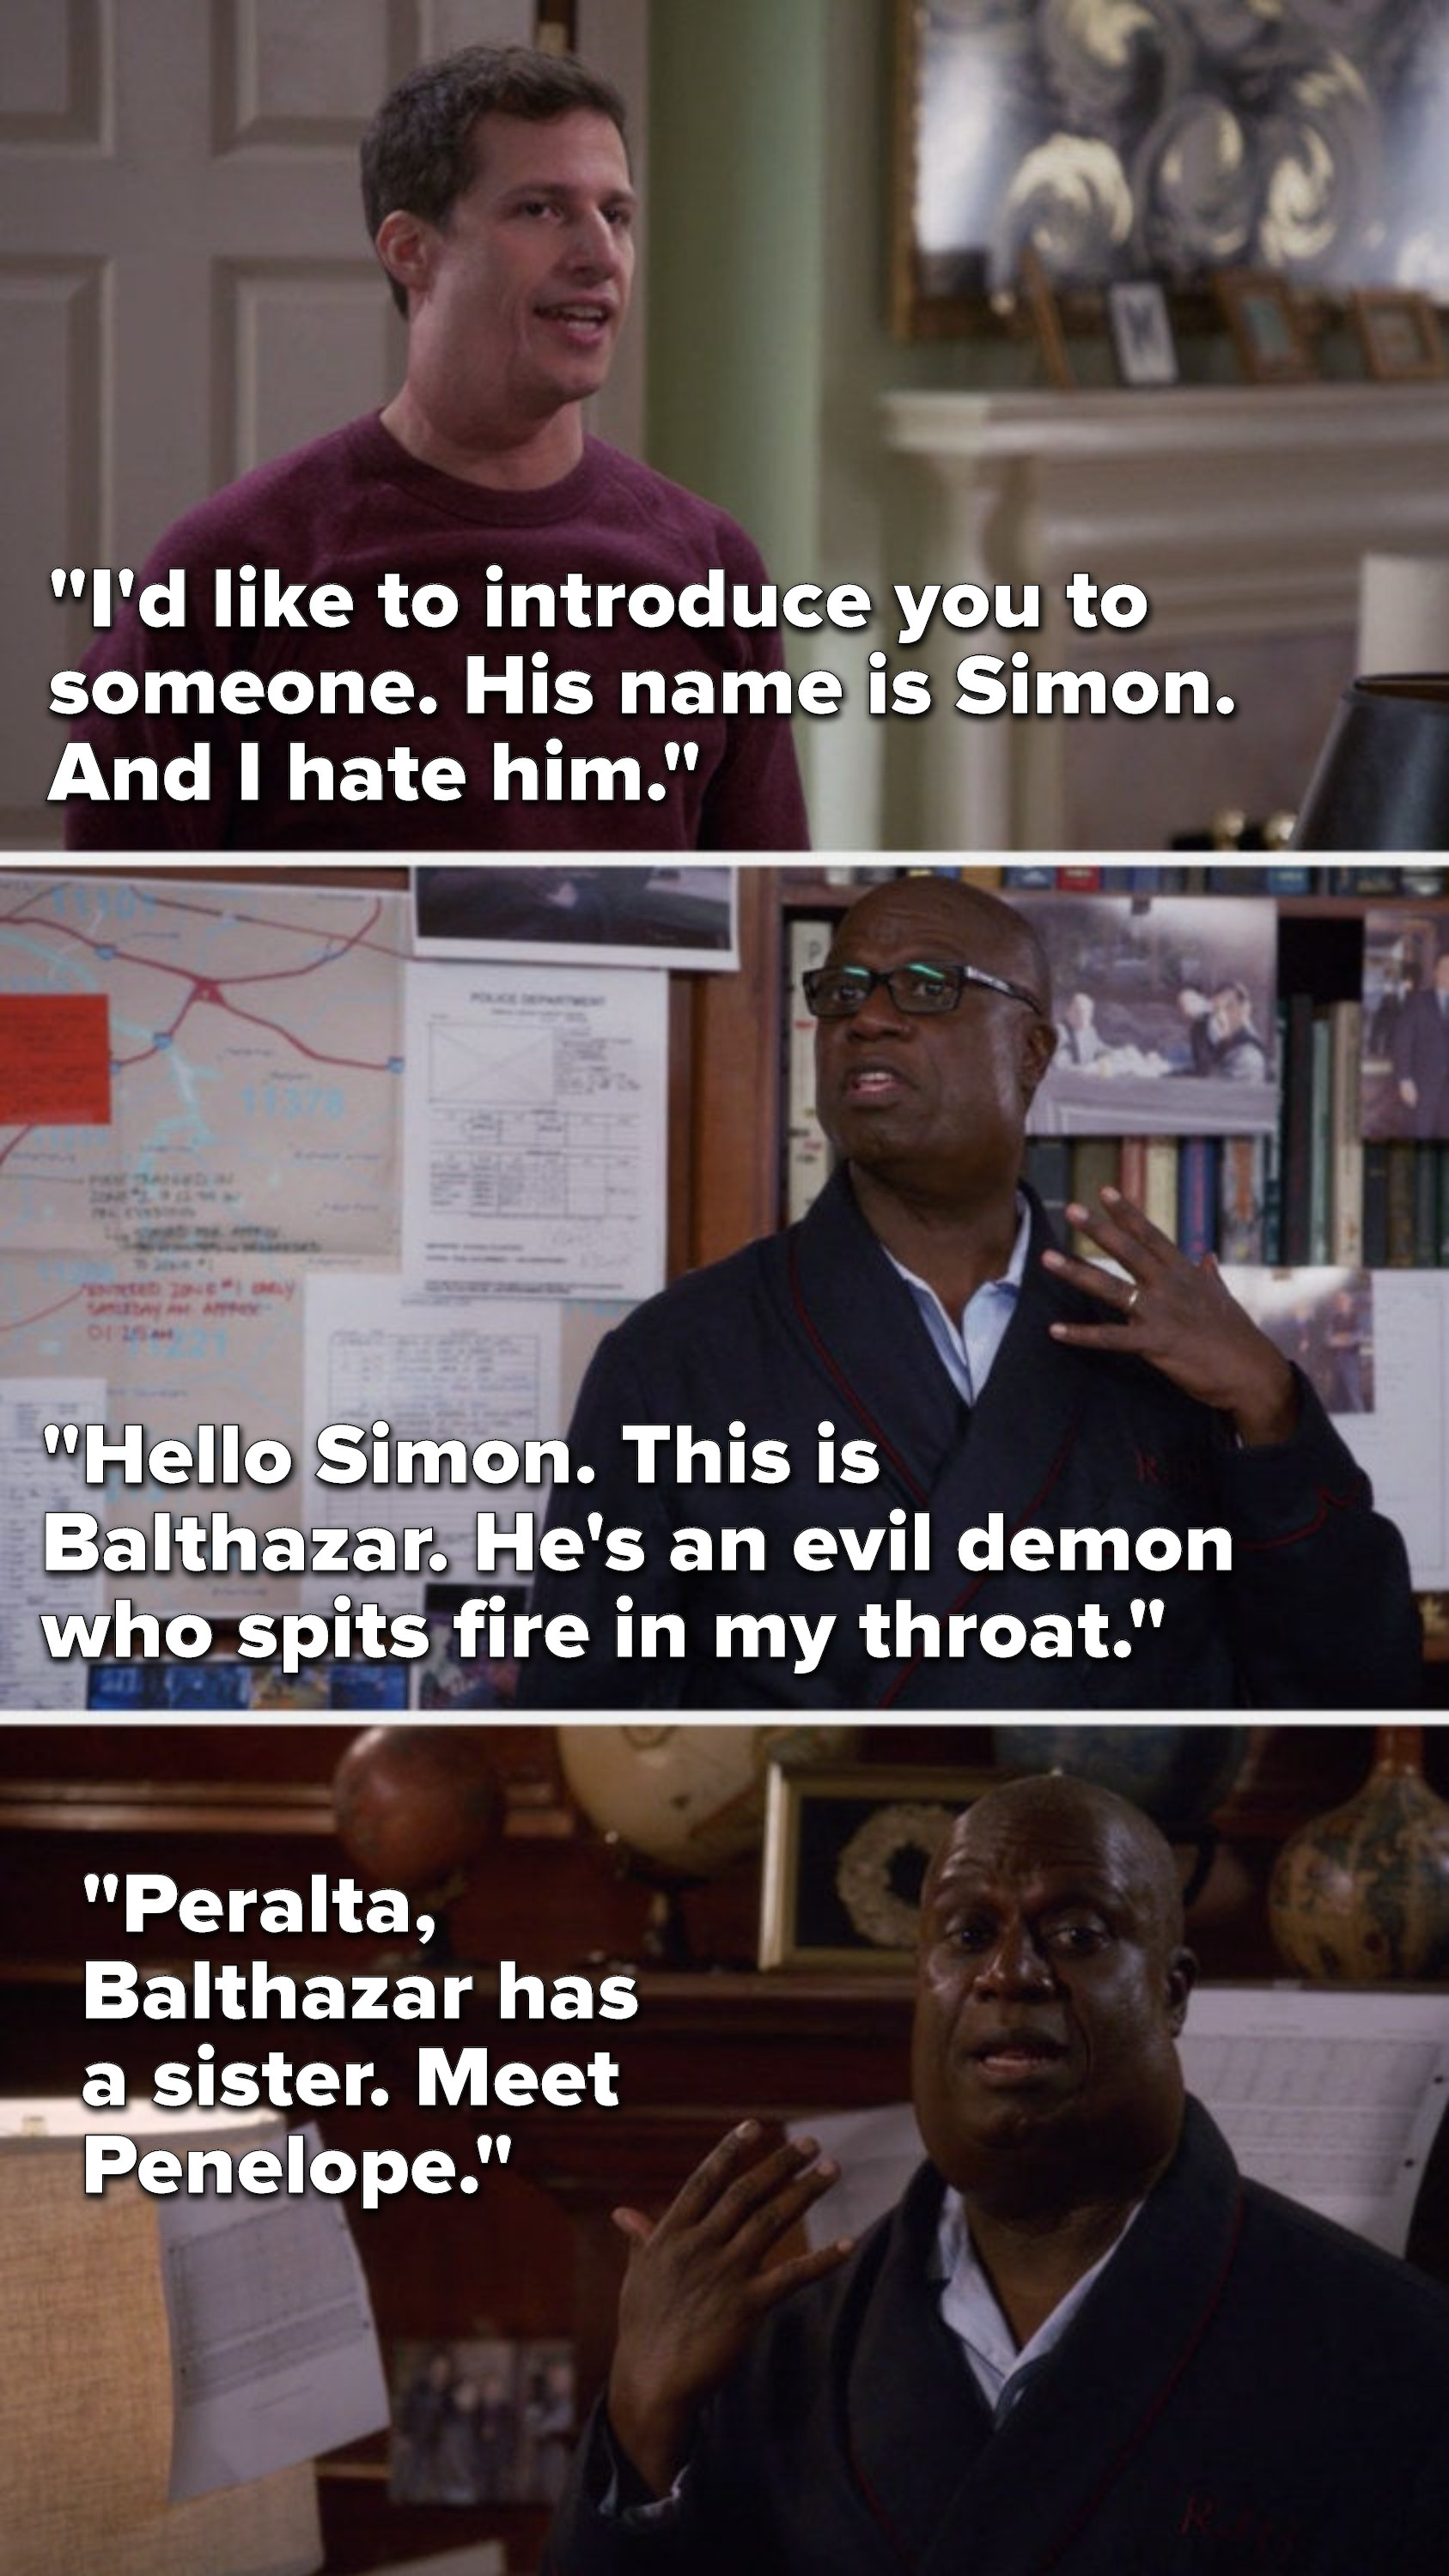 Jake says, &quot;I&#x27;d like to introduce you to someone, his name is Simon and I hate him,&quot; Holt says, &quot;Hello Simon, this is Balthazar, he&#x27;s a demon who spits fire in my throat,&quot; and later Holt has a second goiter and says, &quot;Balthazar has a sister, Penelope&quot;